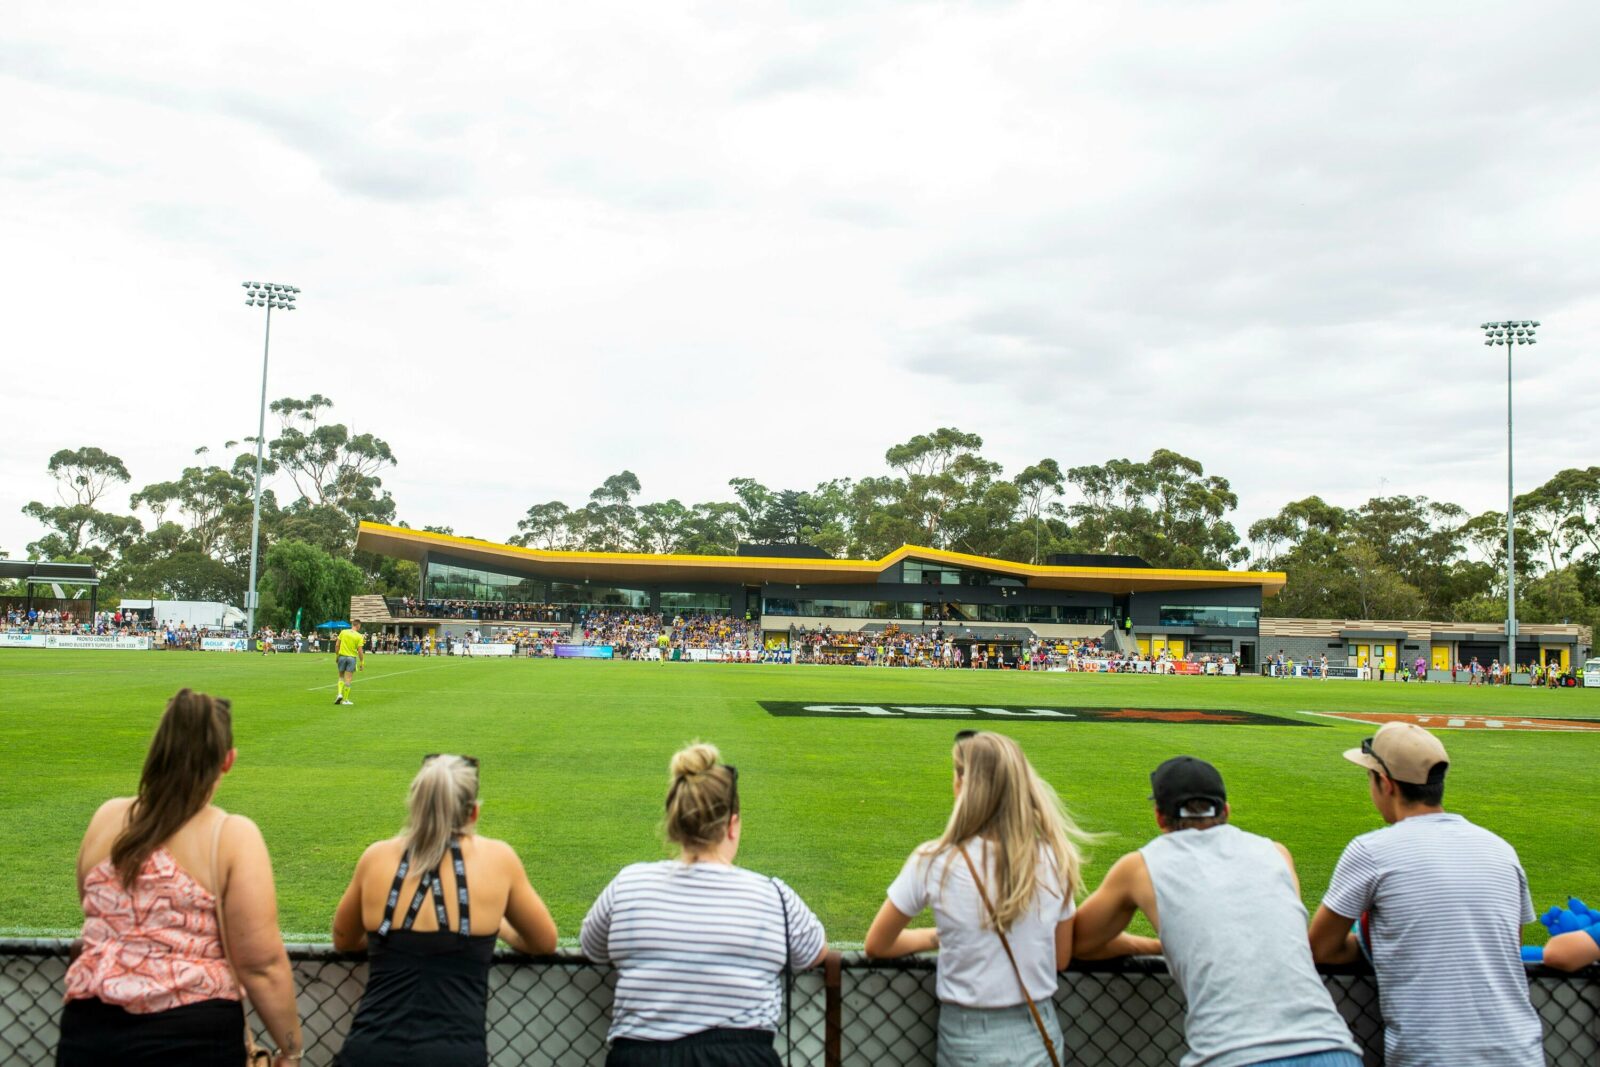 people standing at fence watching football at Chirnside Park